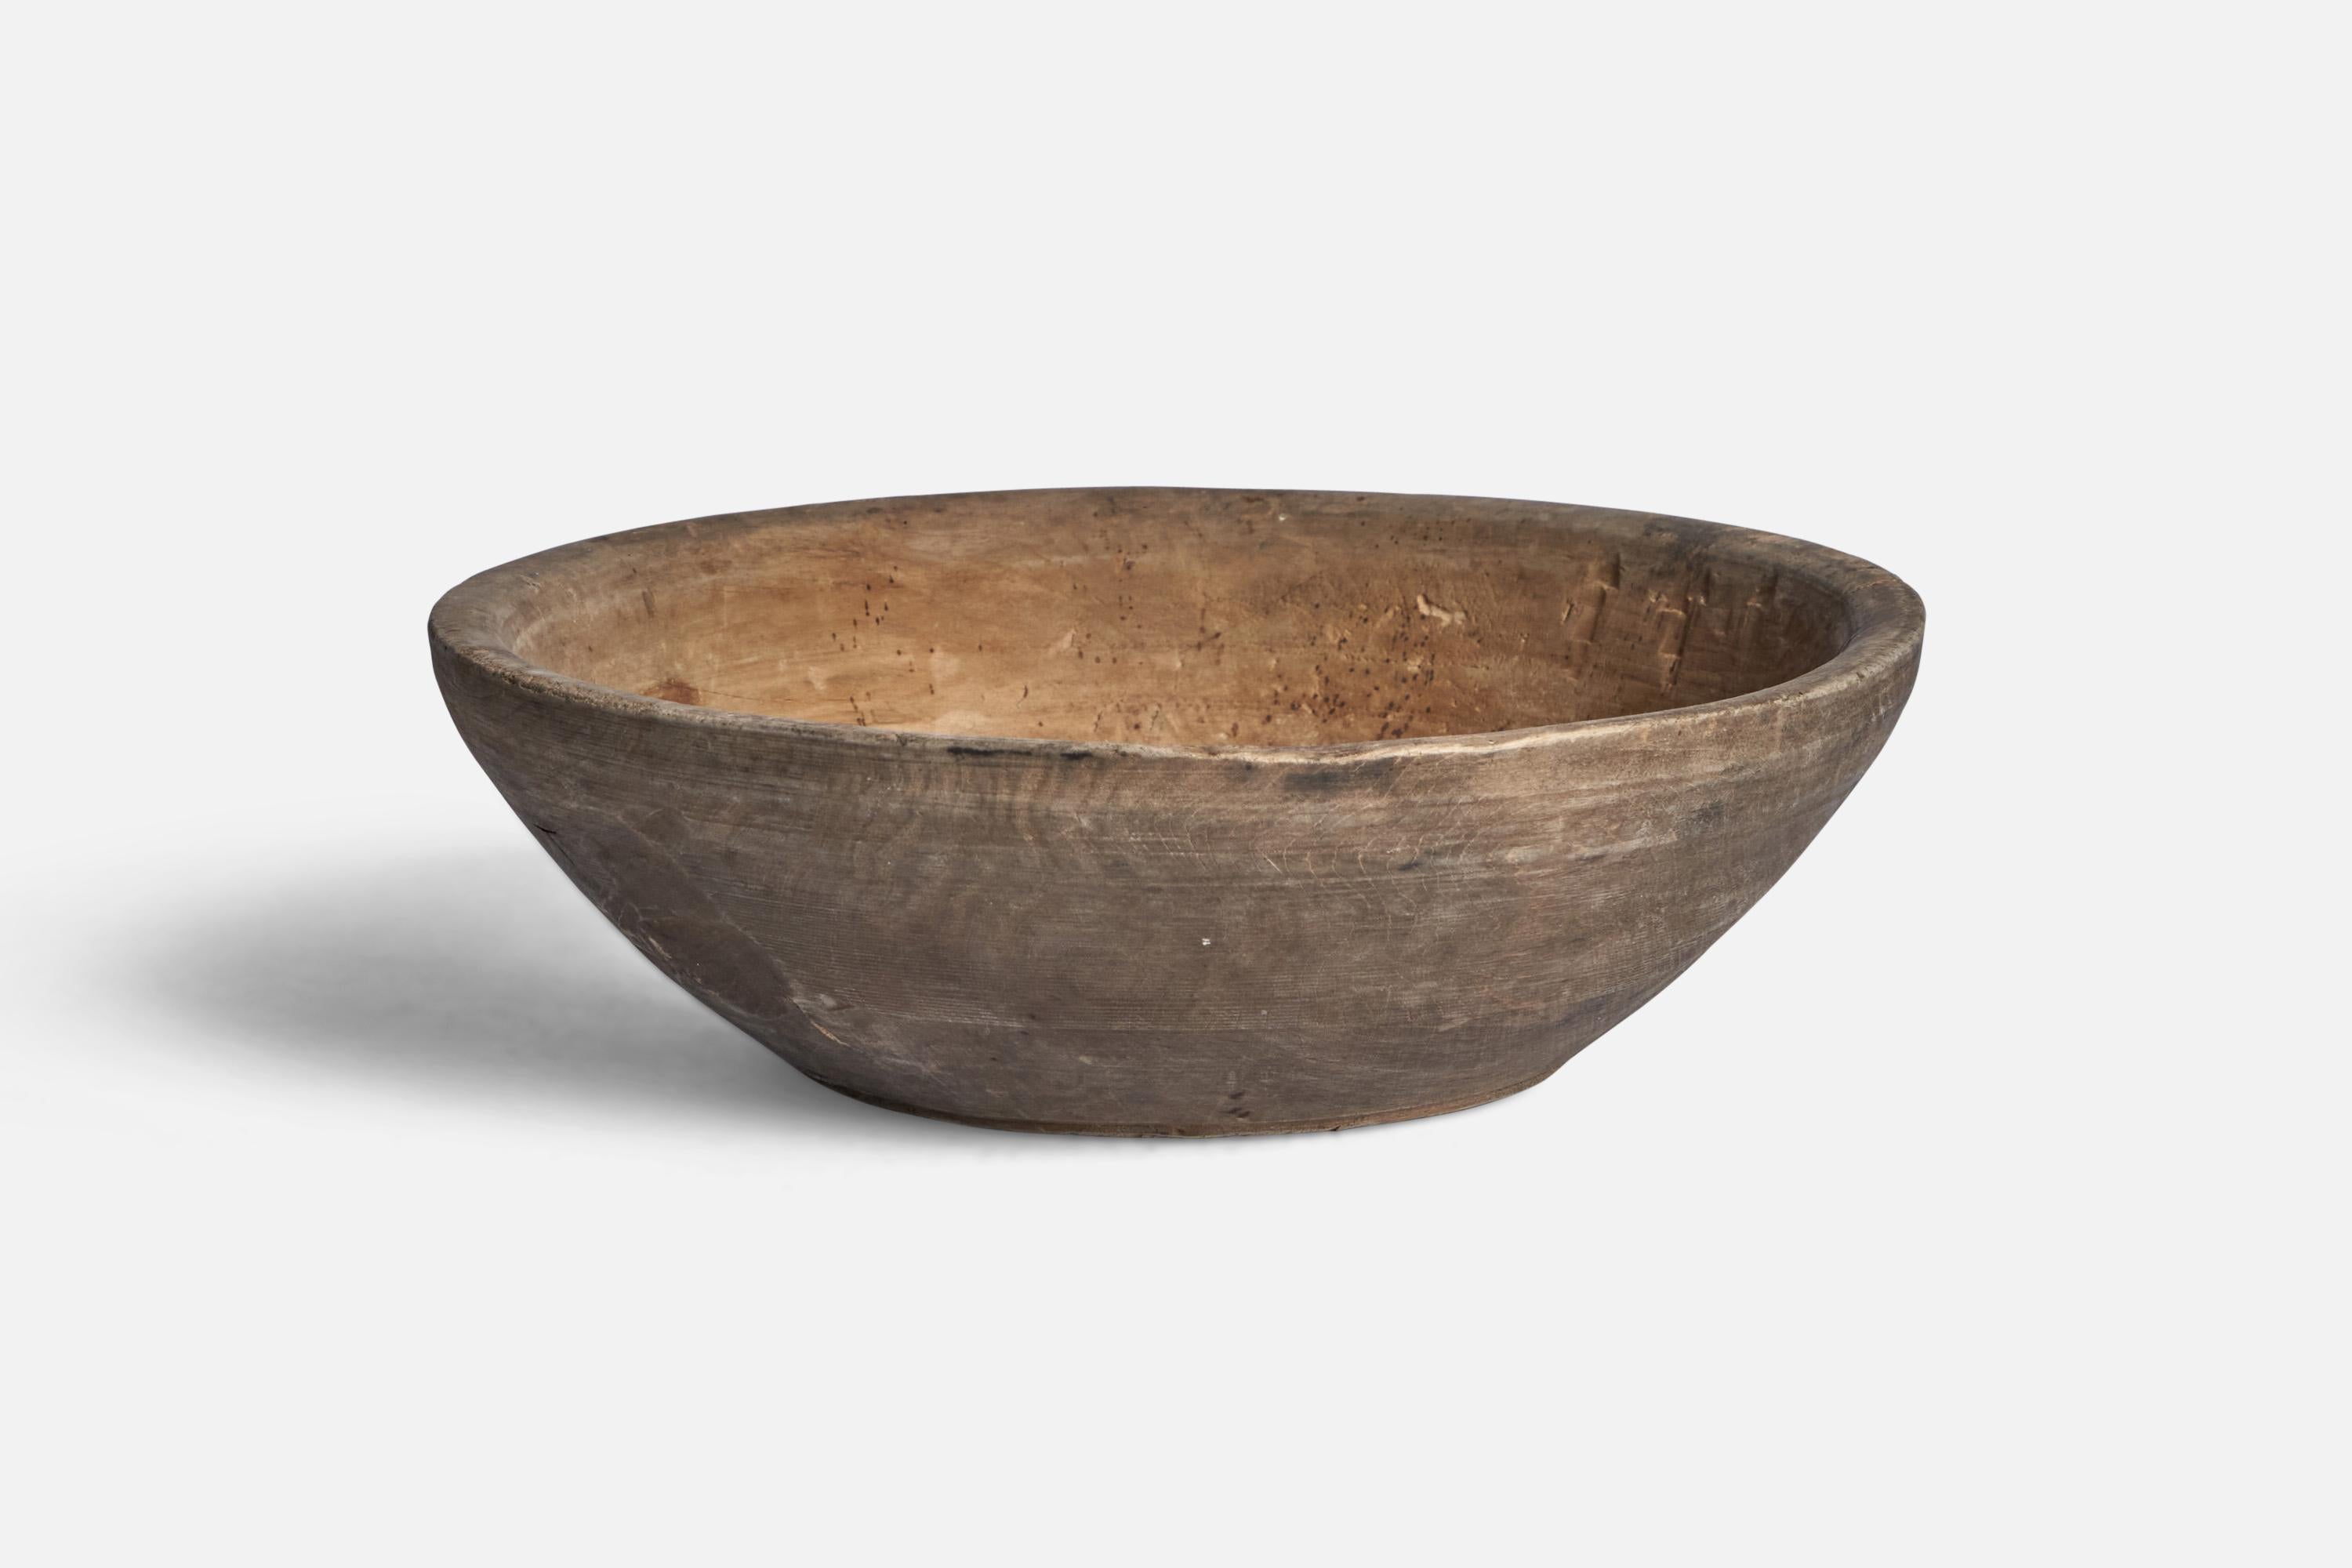 A wood bowl produced in Sweden, 19th century.

“BÖL.EAS.” on bottom.